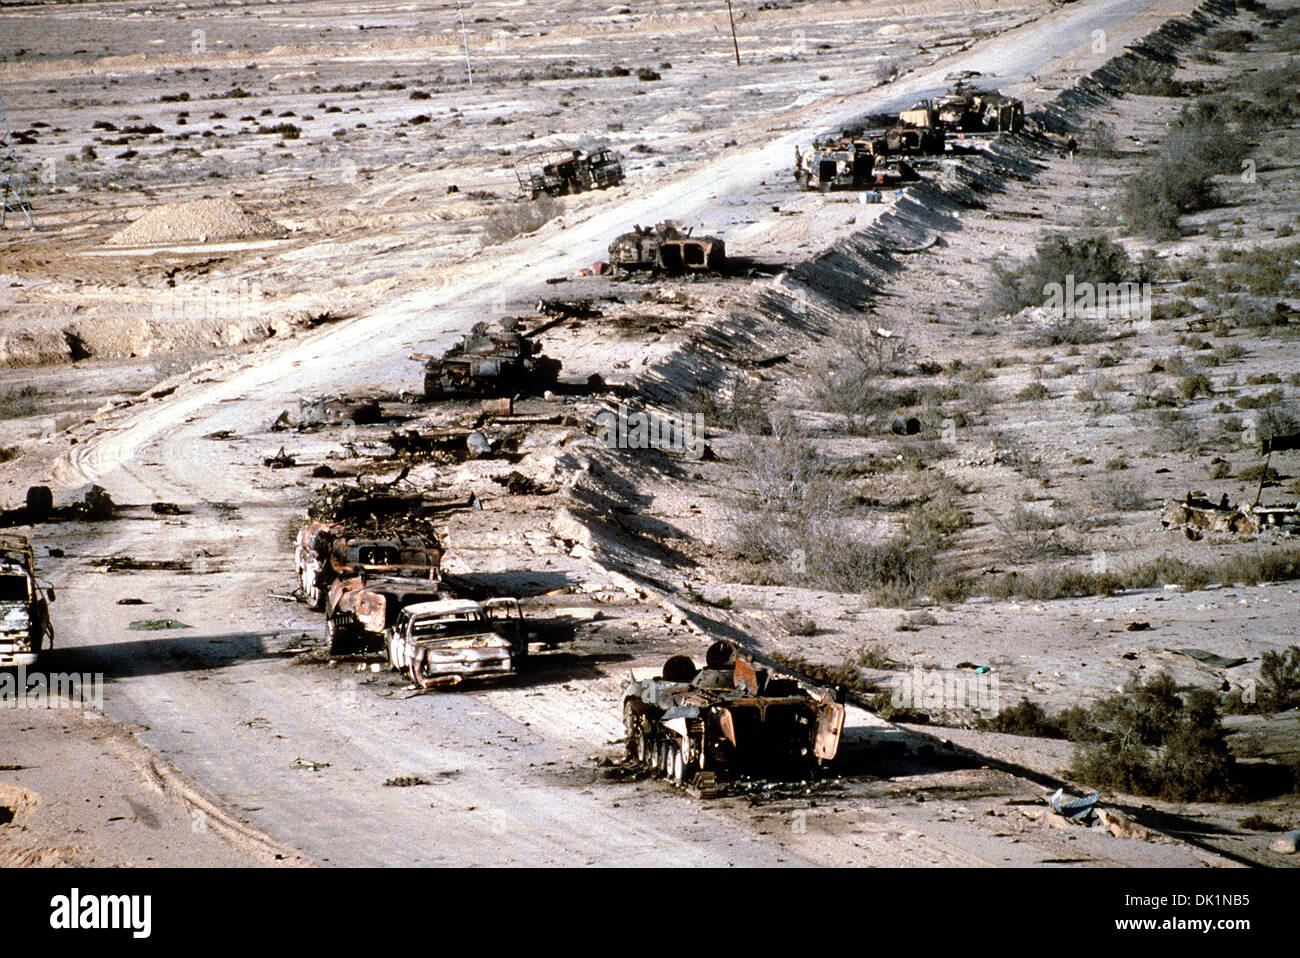 Aerial view of demolished Iraqi military vehicles destroyed by coalition forces along a roadway in the Euphrates River Valley in the aftermath of Operation Desert Storm March 4, 1991 in Iraq. Stock Photo